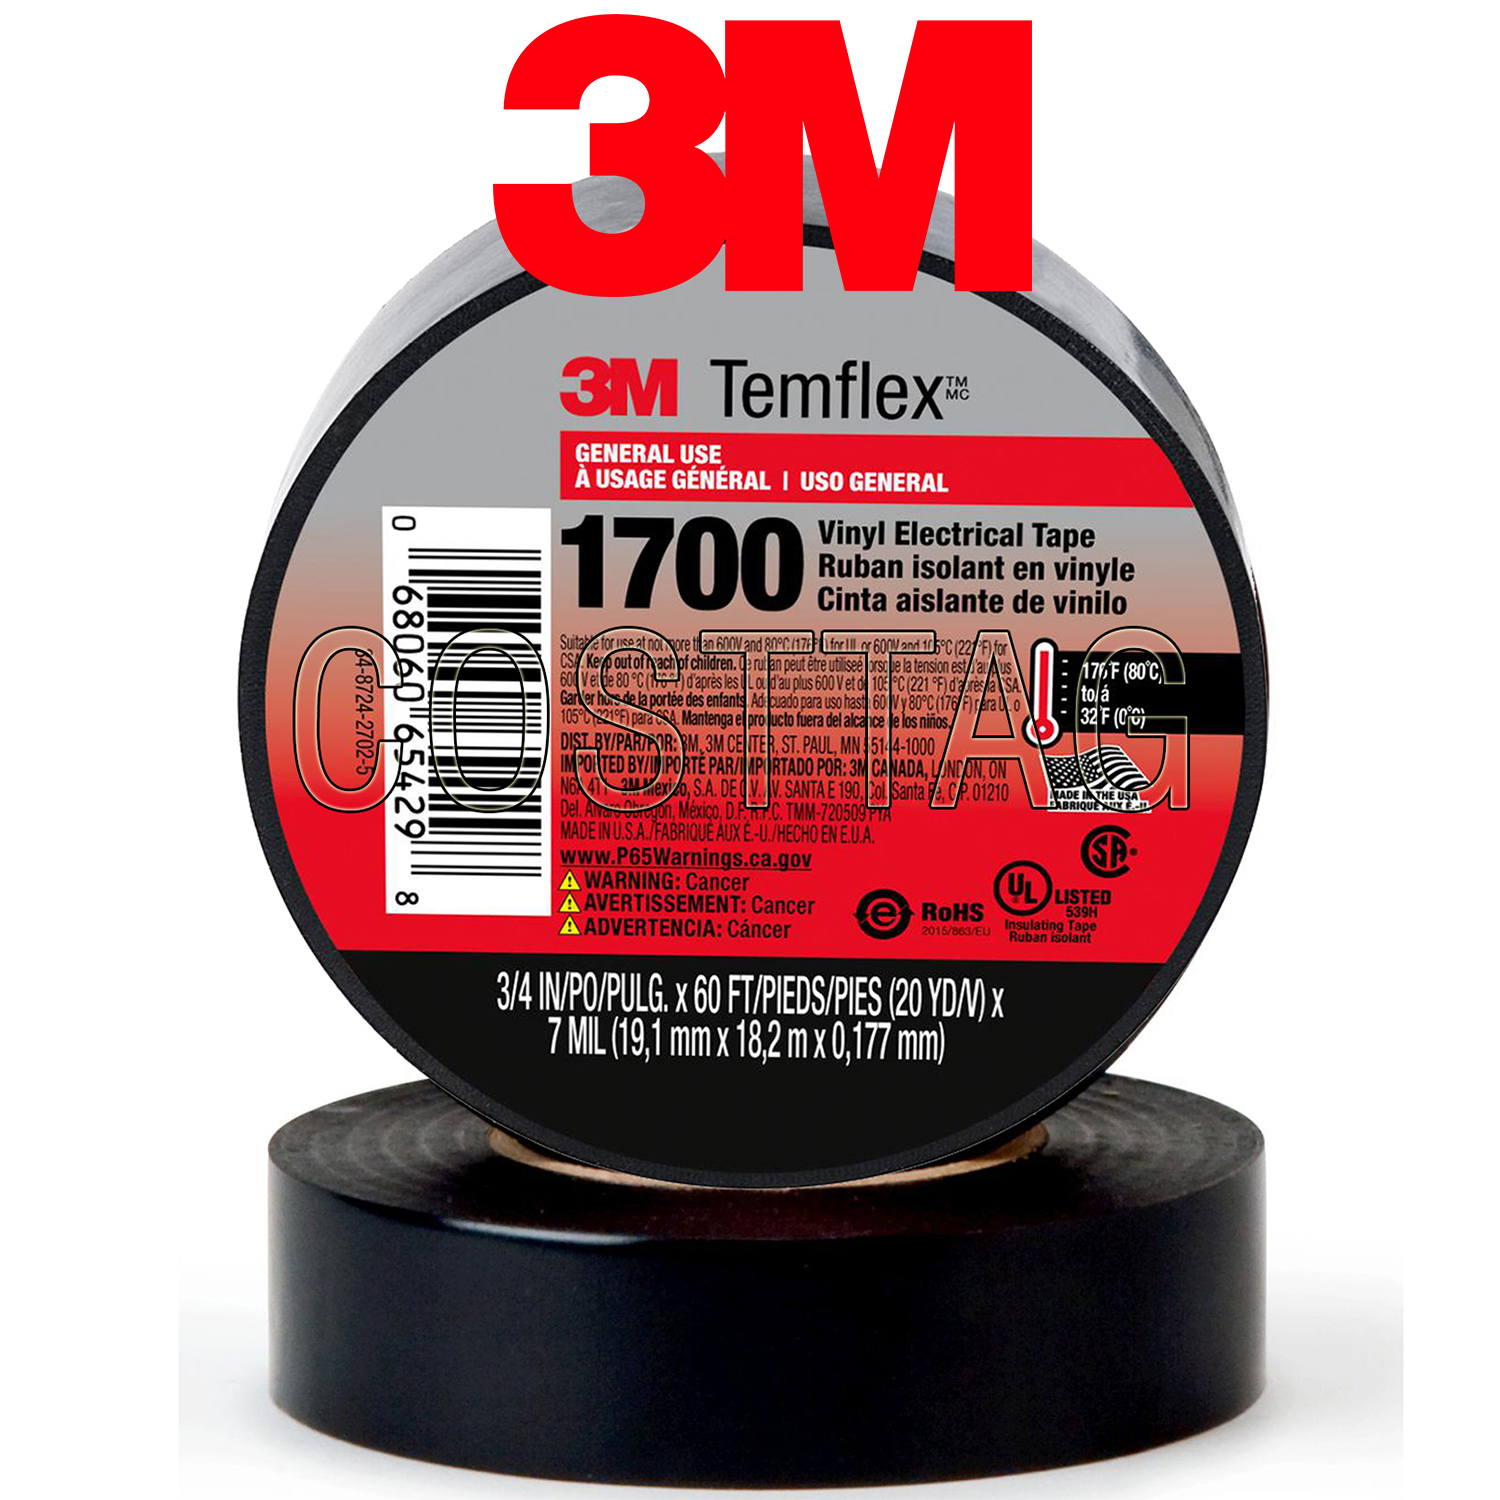 (5 ROLLS) 3M TEMFLEX 1700 ELECTRICAL TAPE BLACK 3/4" x 60 FT INSULATED ELECTRIC